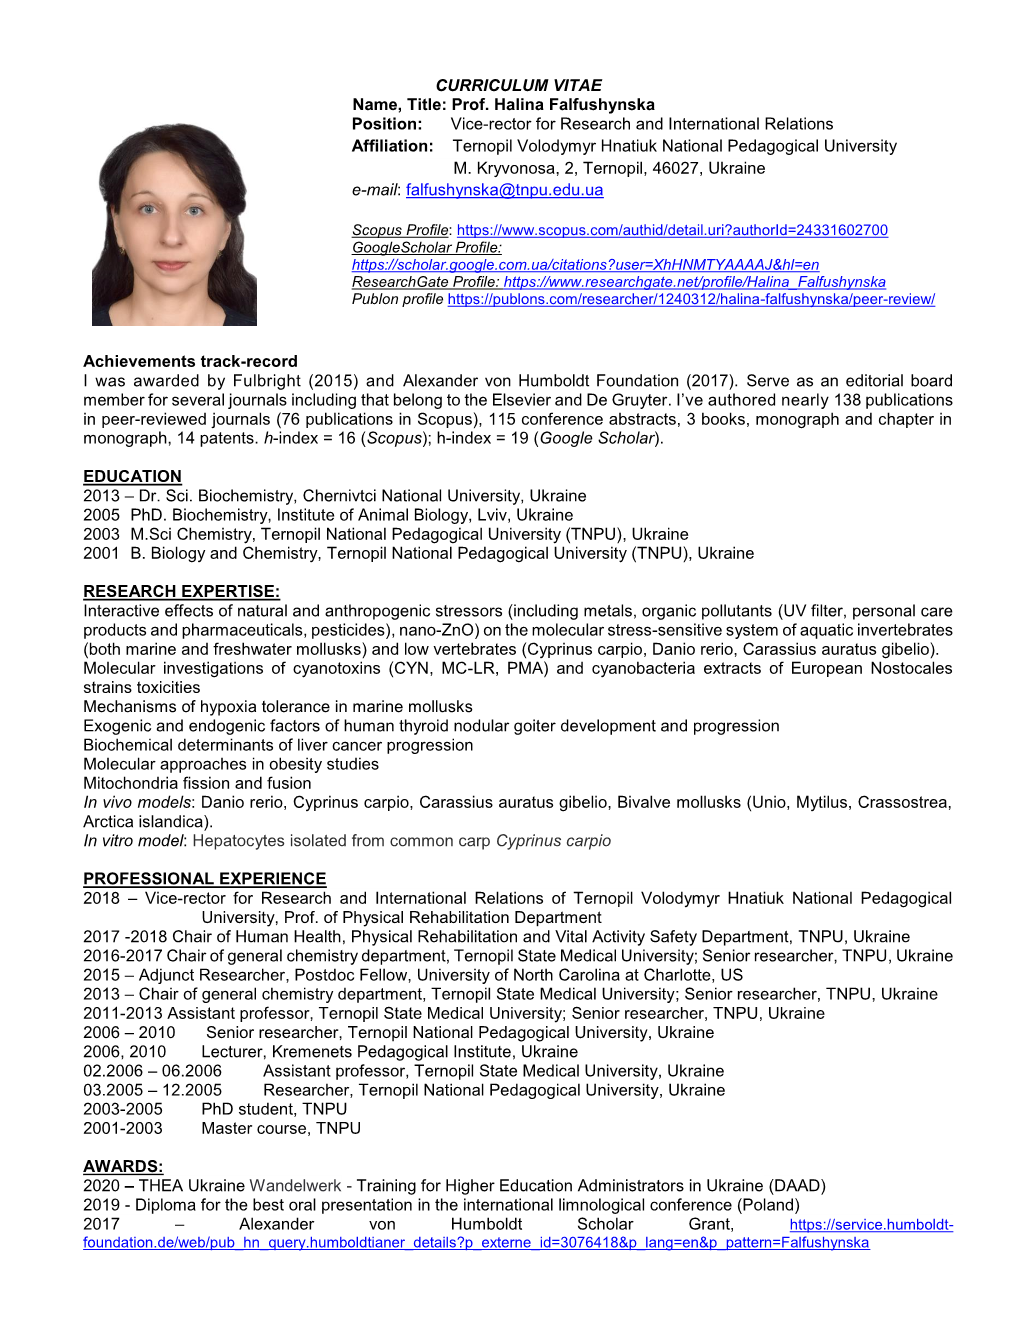 CURRICULUM VITAE Name, Title: Prof. Halina Falfushynska Position: Vice-Rector for Research and International Relations Affil